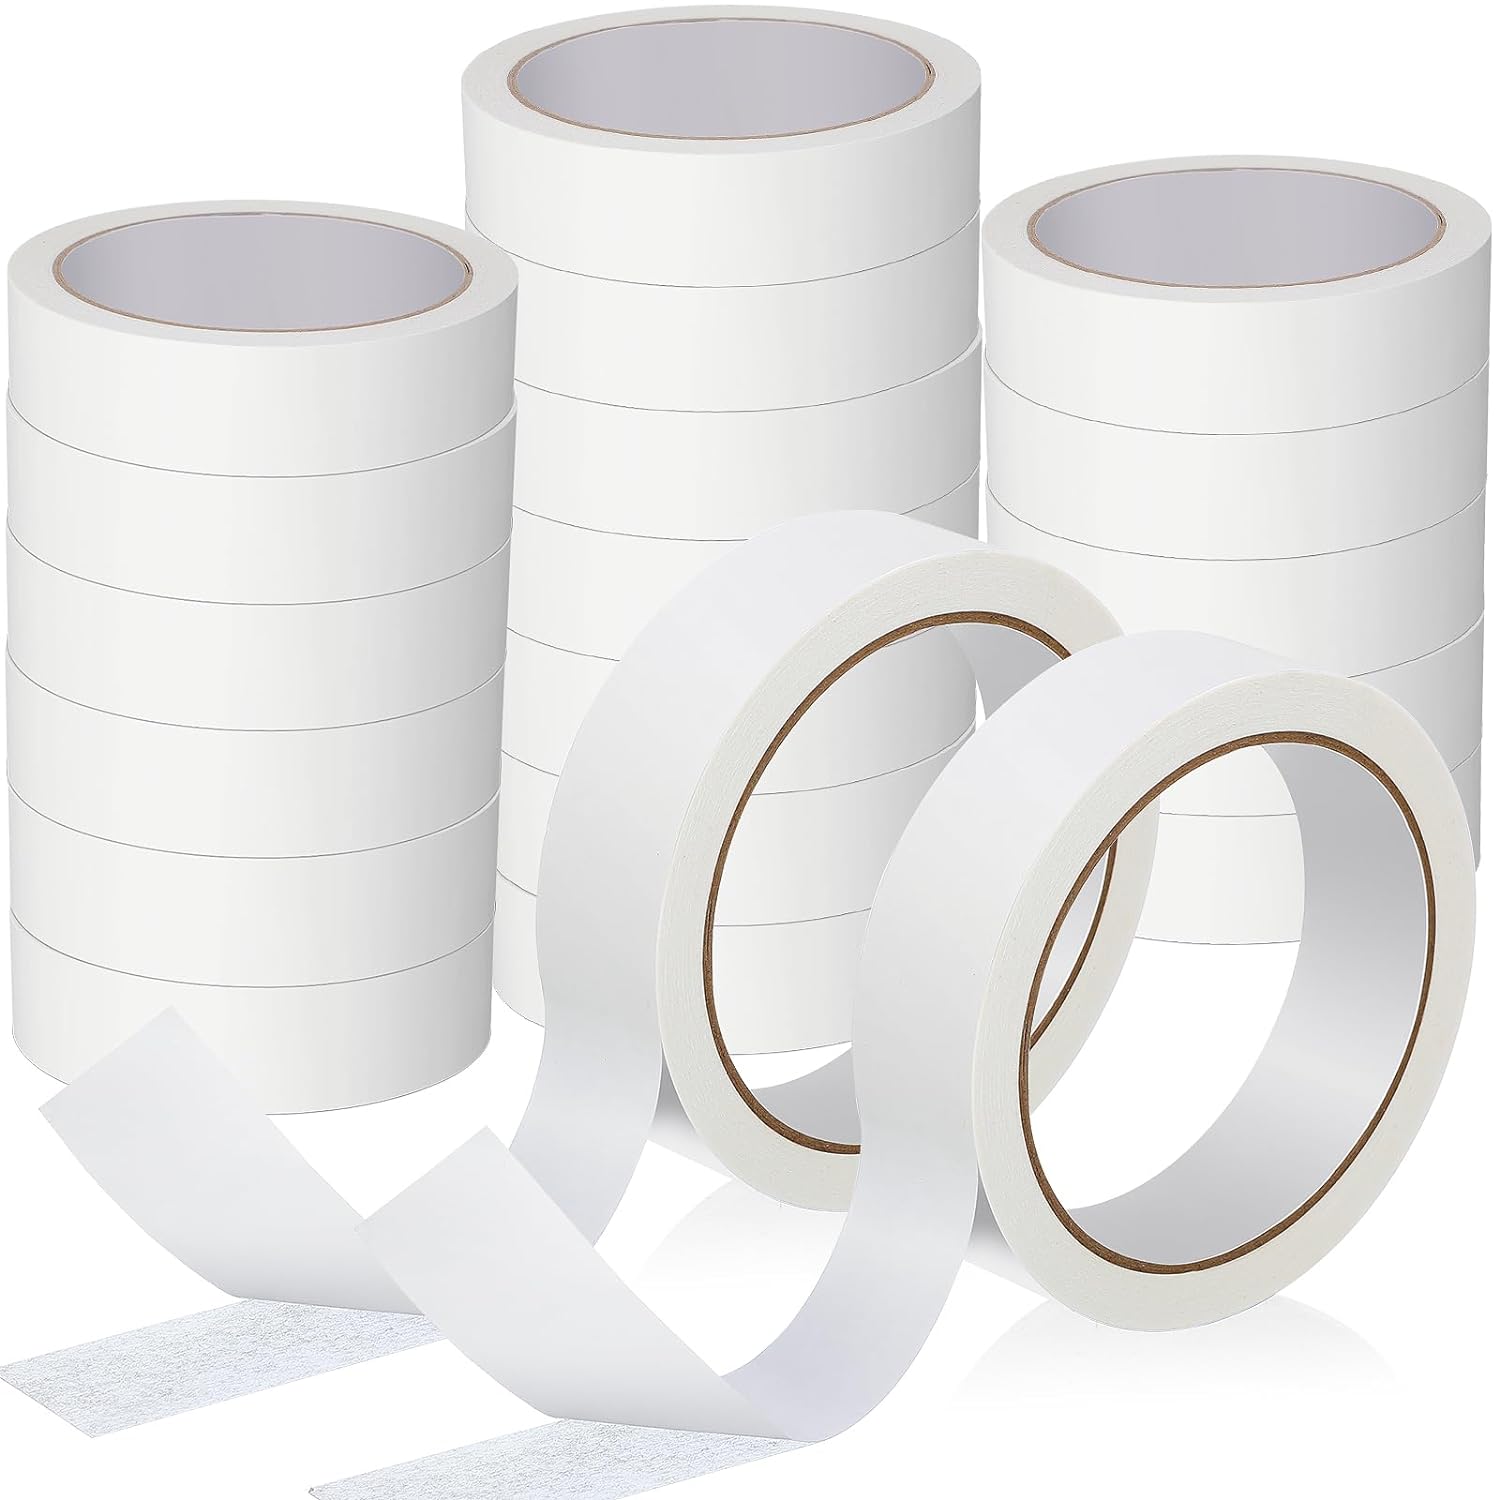 20 Rolls Double Sided Adhesive Tape for Craft Scrapbook (1in x 50Ft)